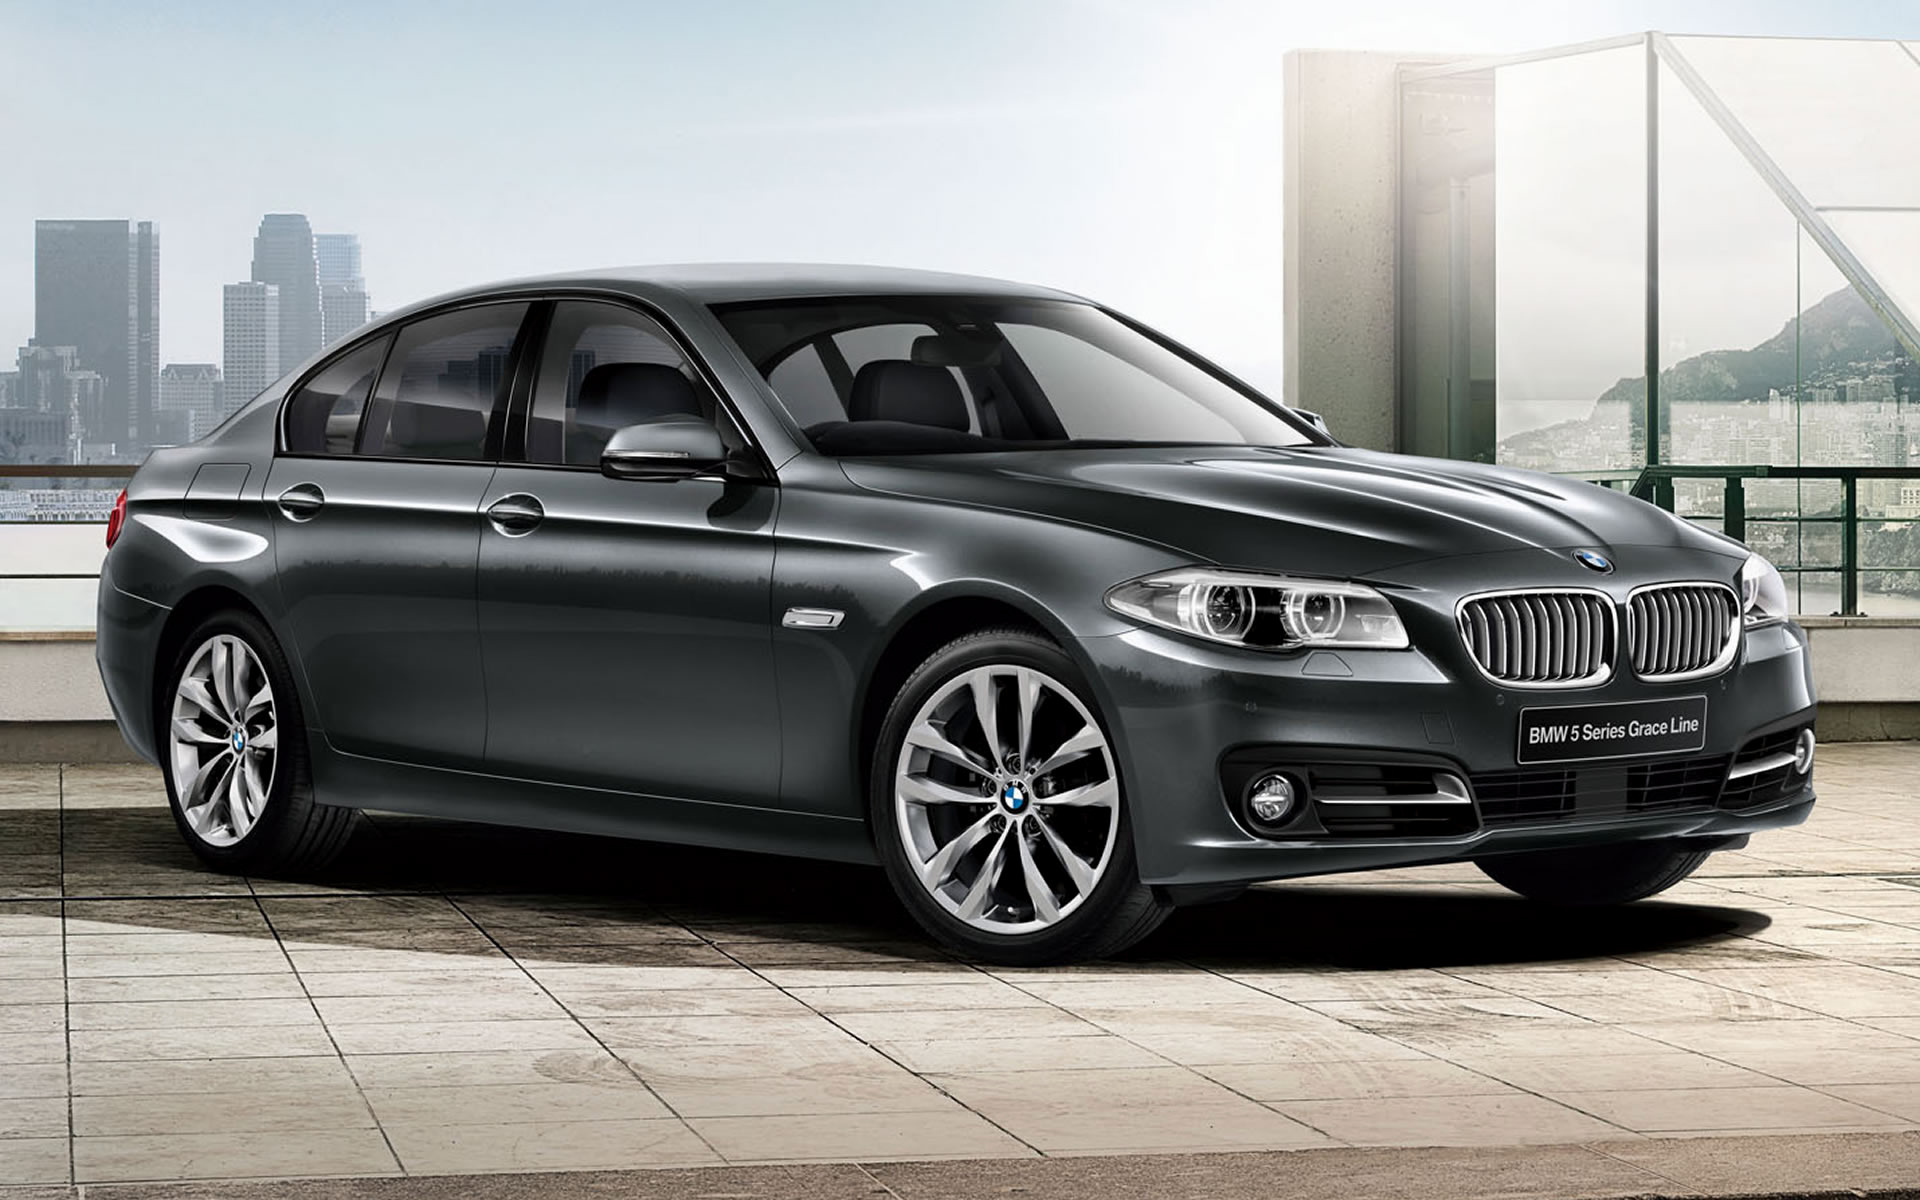 2015 BMW 5 Series Grace (JP) Wallpapers and Images | Car Pixel